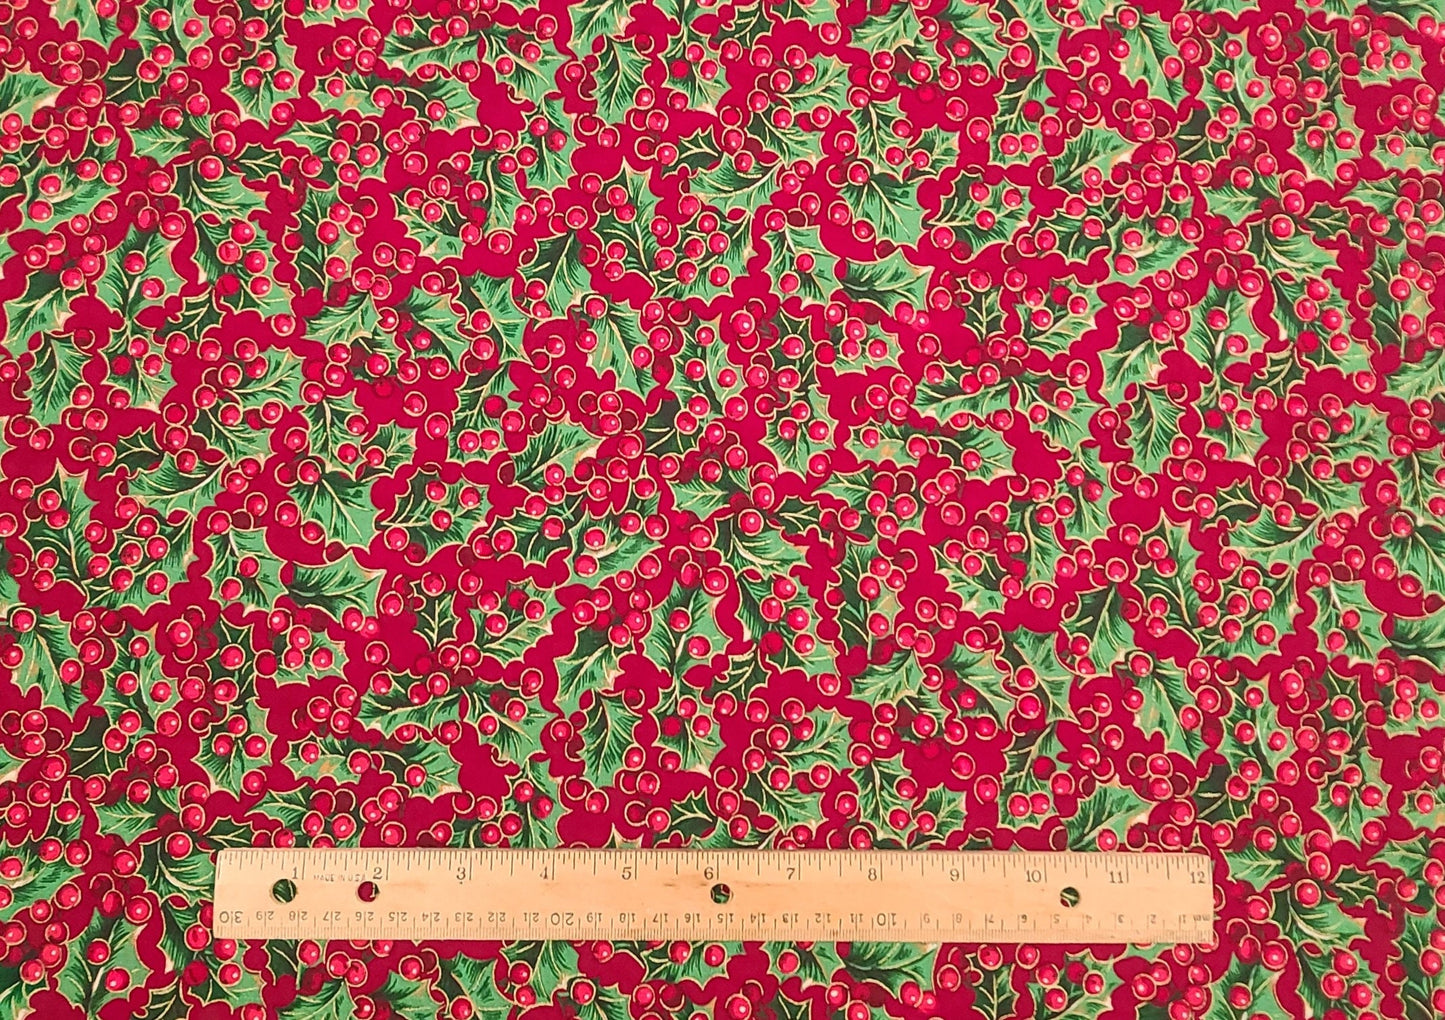 EOB - VIP Cranston Print Works - Dark Red Fabric / Green Holly Leaf and Red Berry Print / Gold Metallic Accents